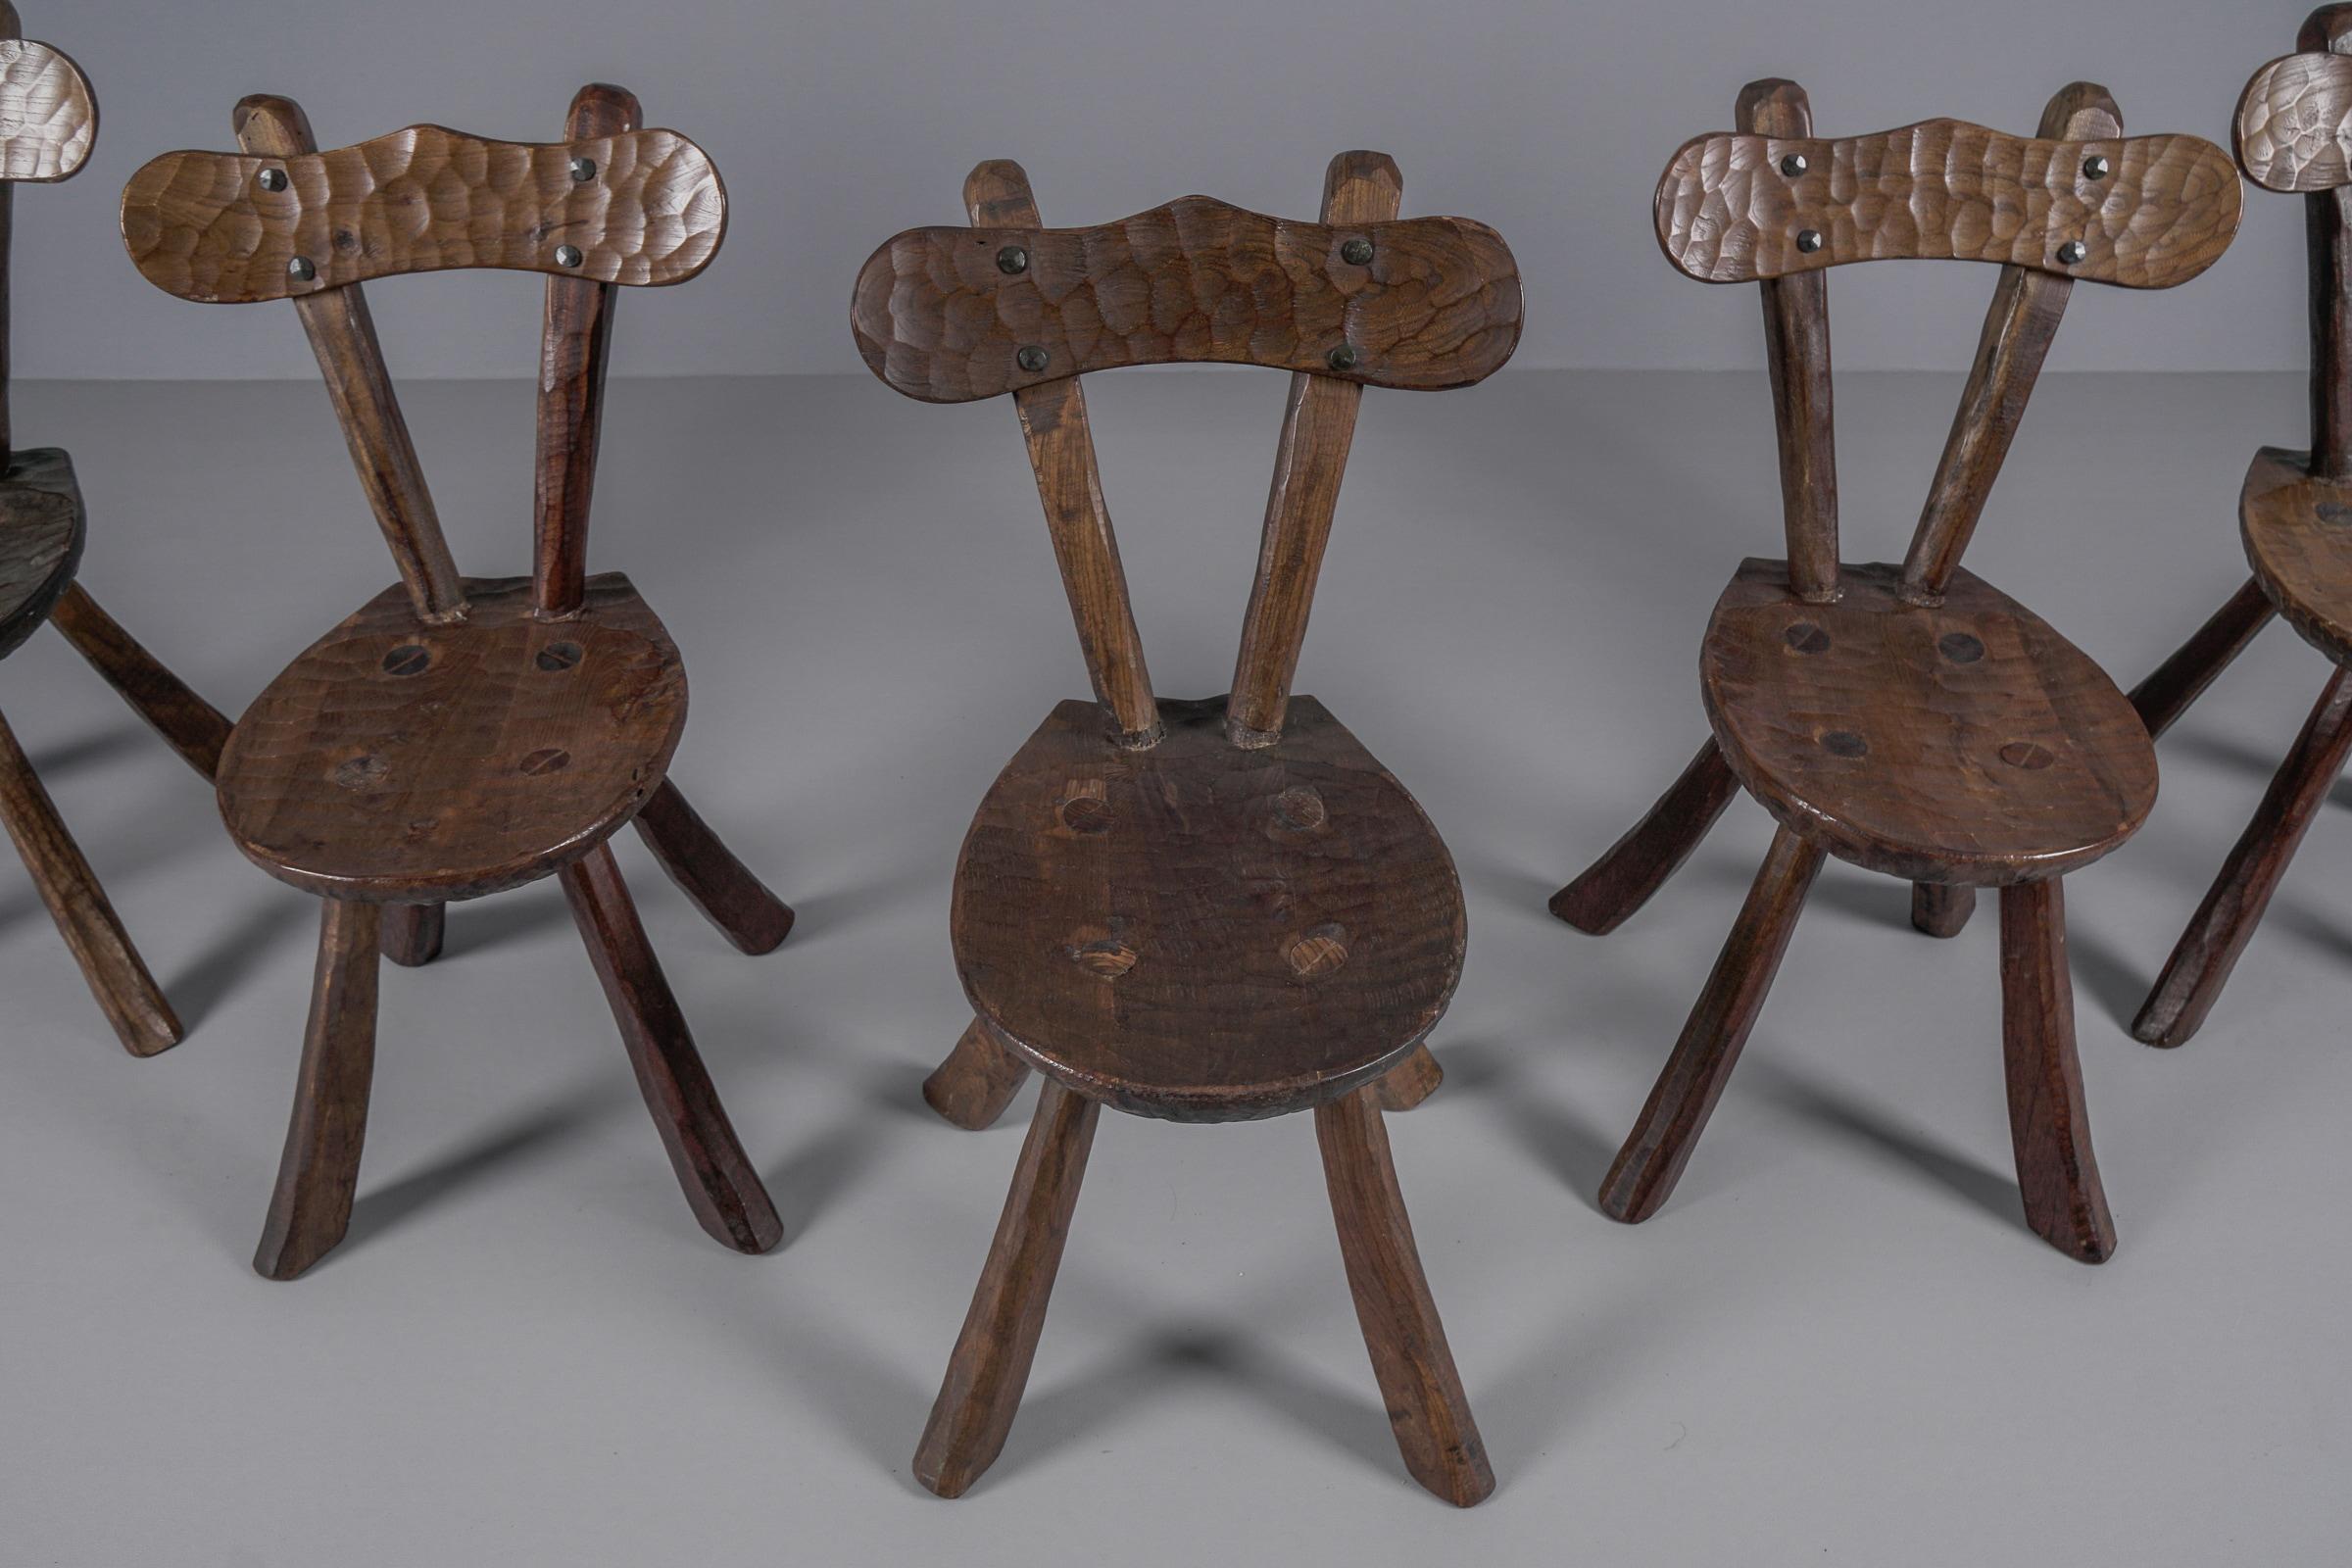 Set of 5 Brutalist Rustic Modern Sculptured Chairs i. t. Style of Alexandre Noll For Sale 4